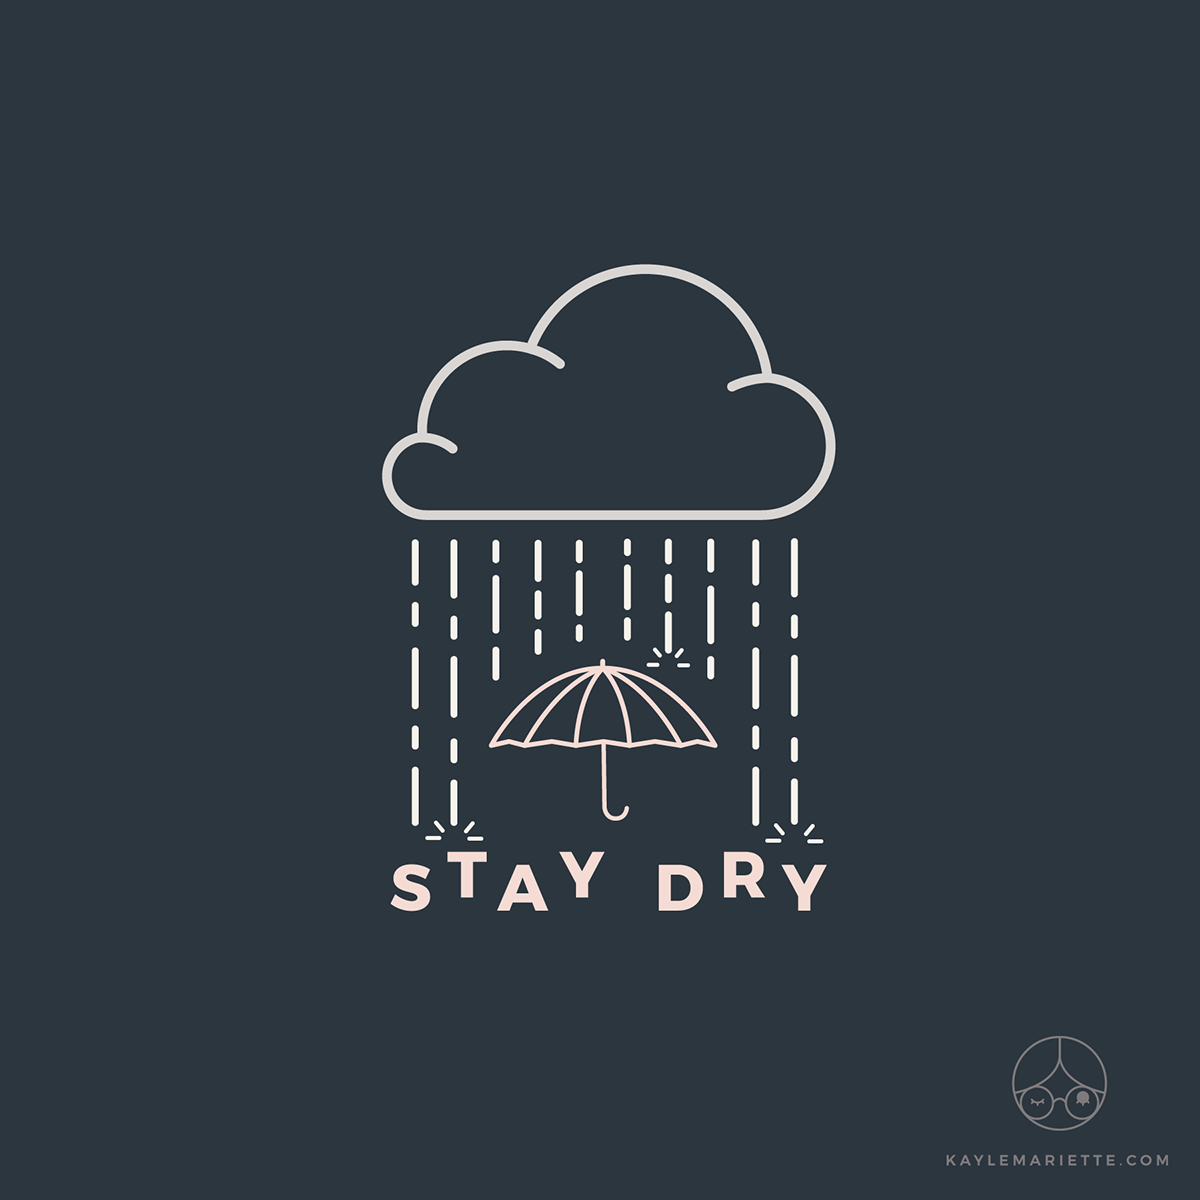 Stay Dry :: Behance